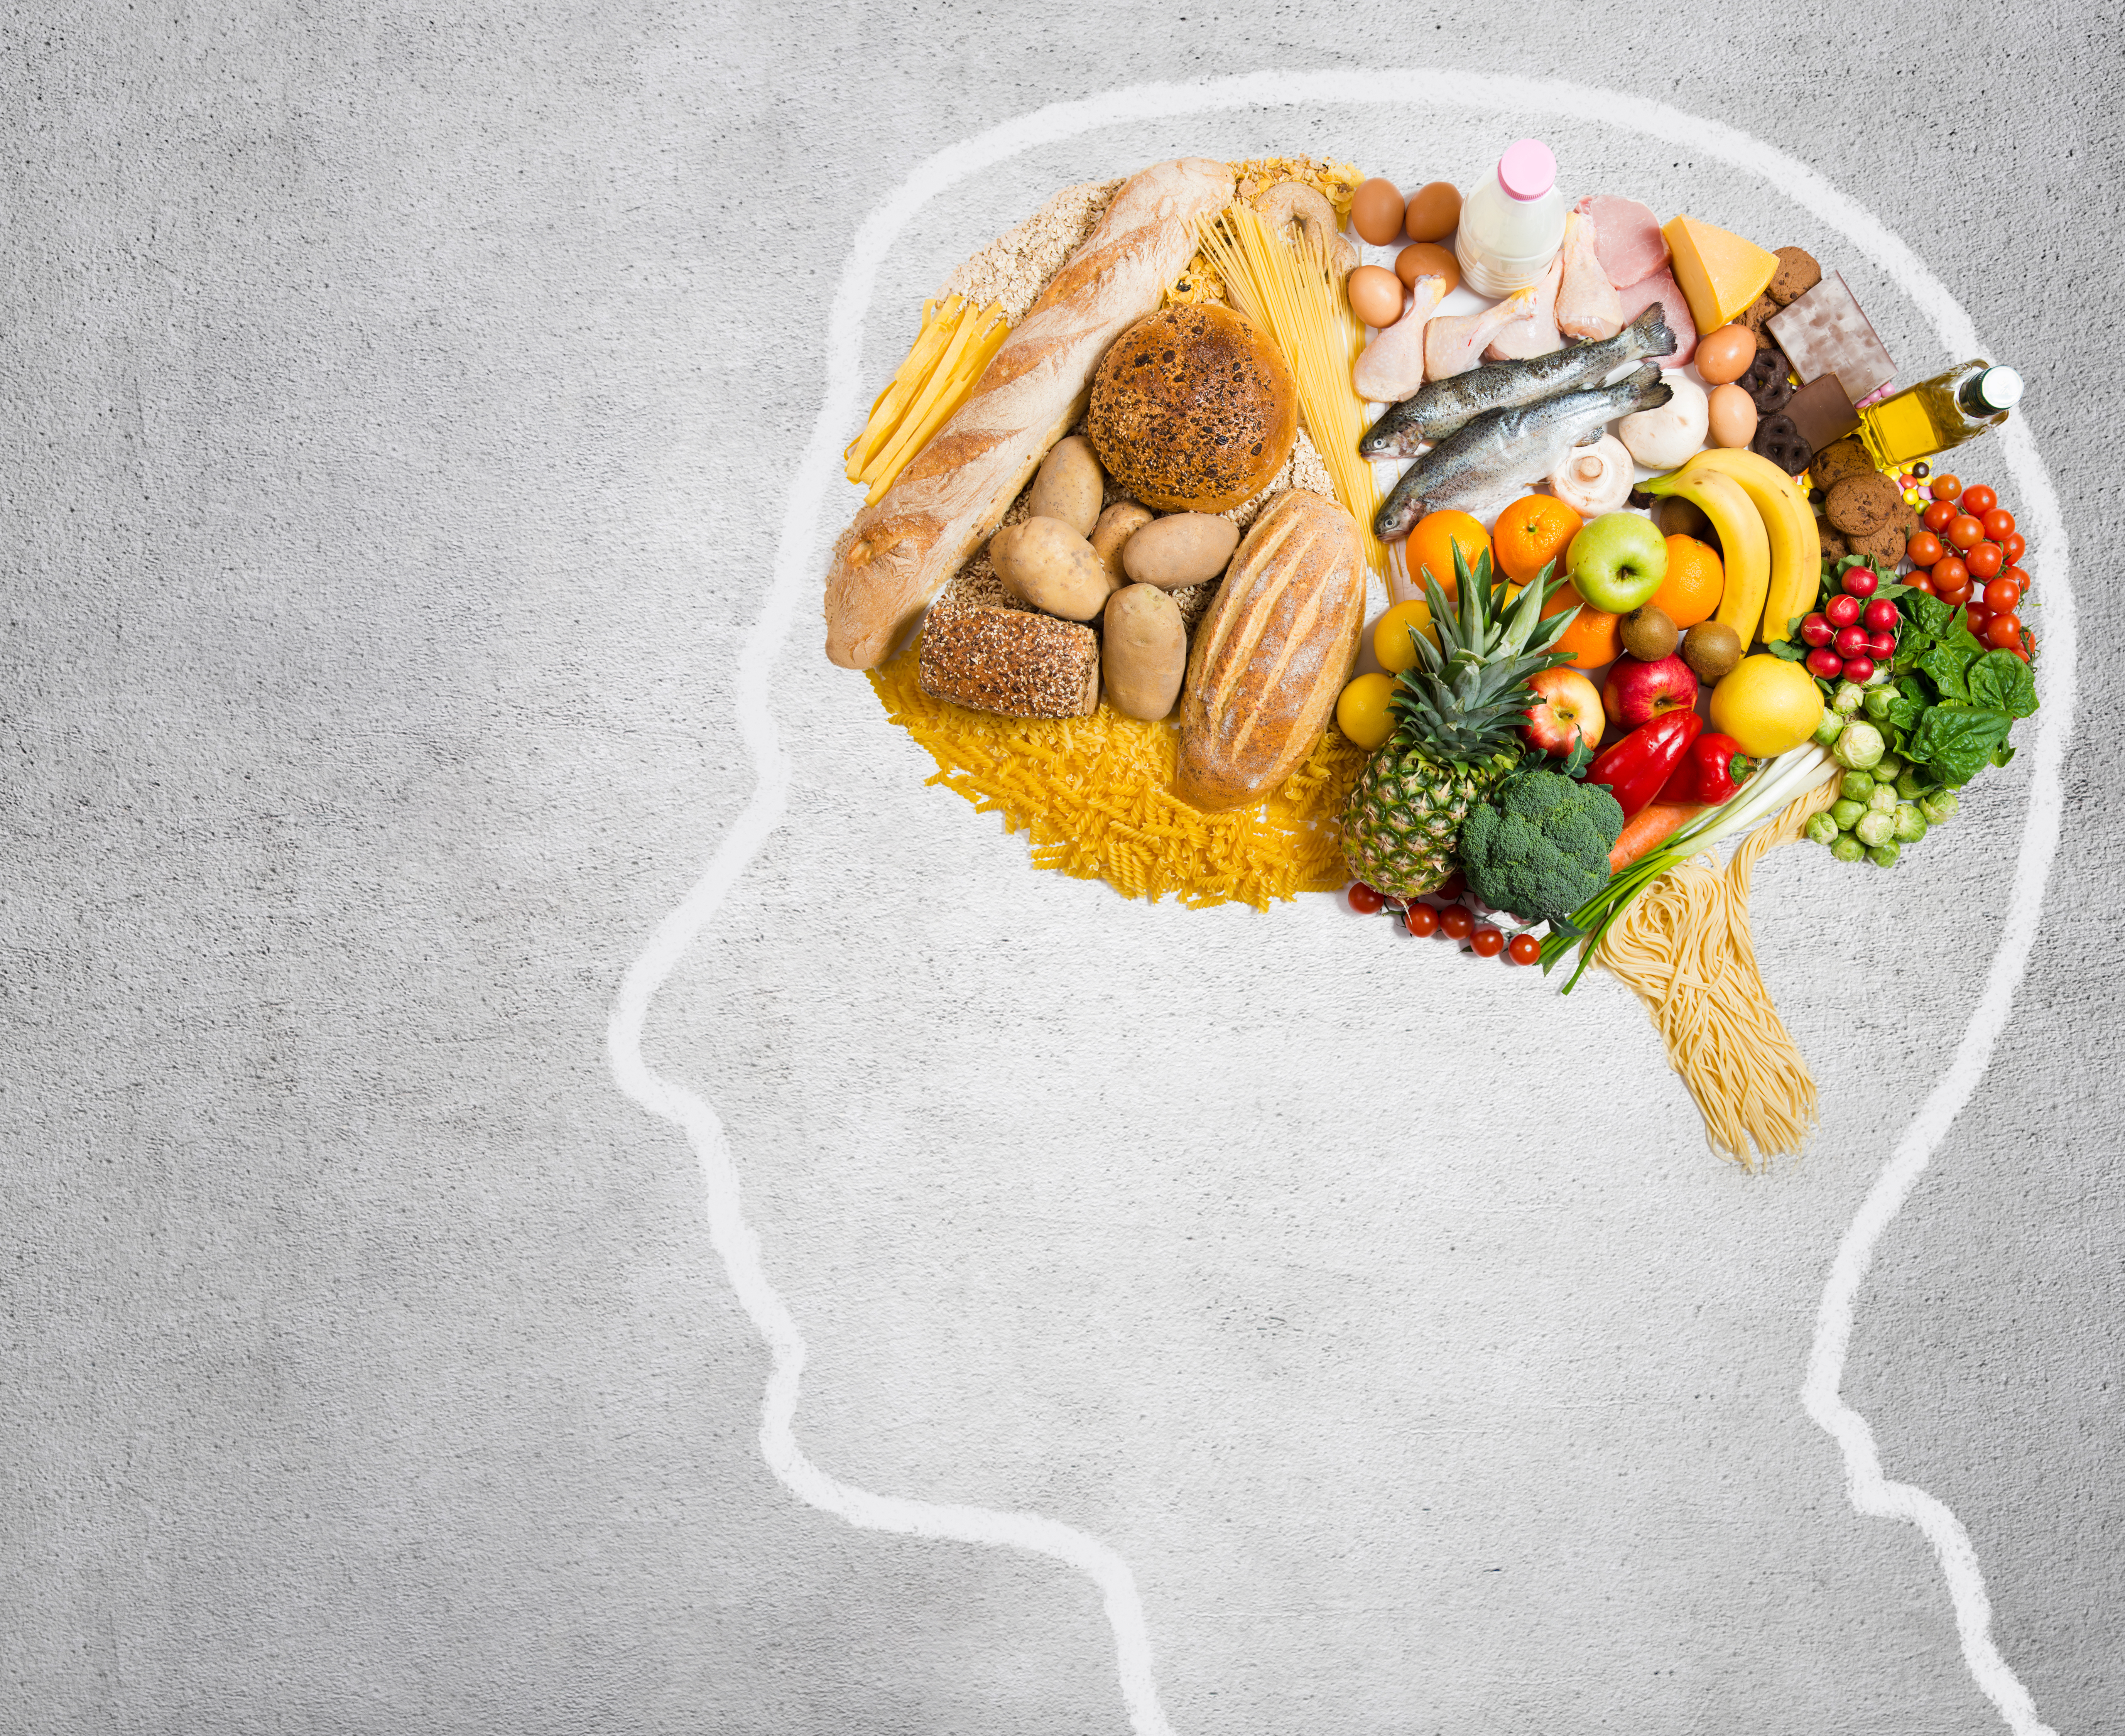 10 best foods and herbs to boost memory and concentration